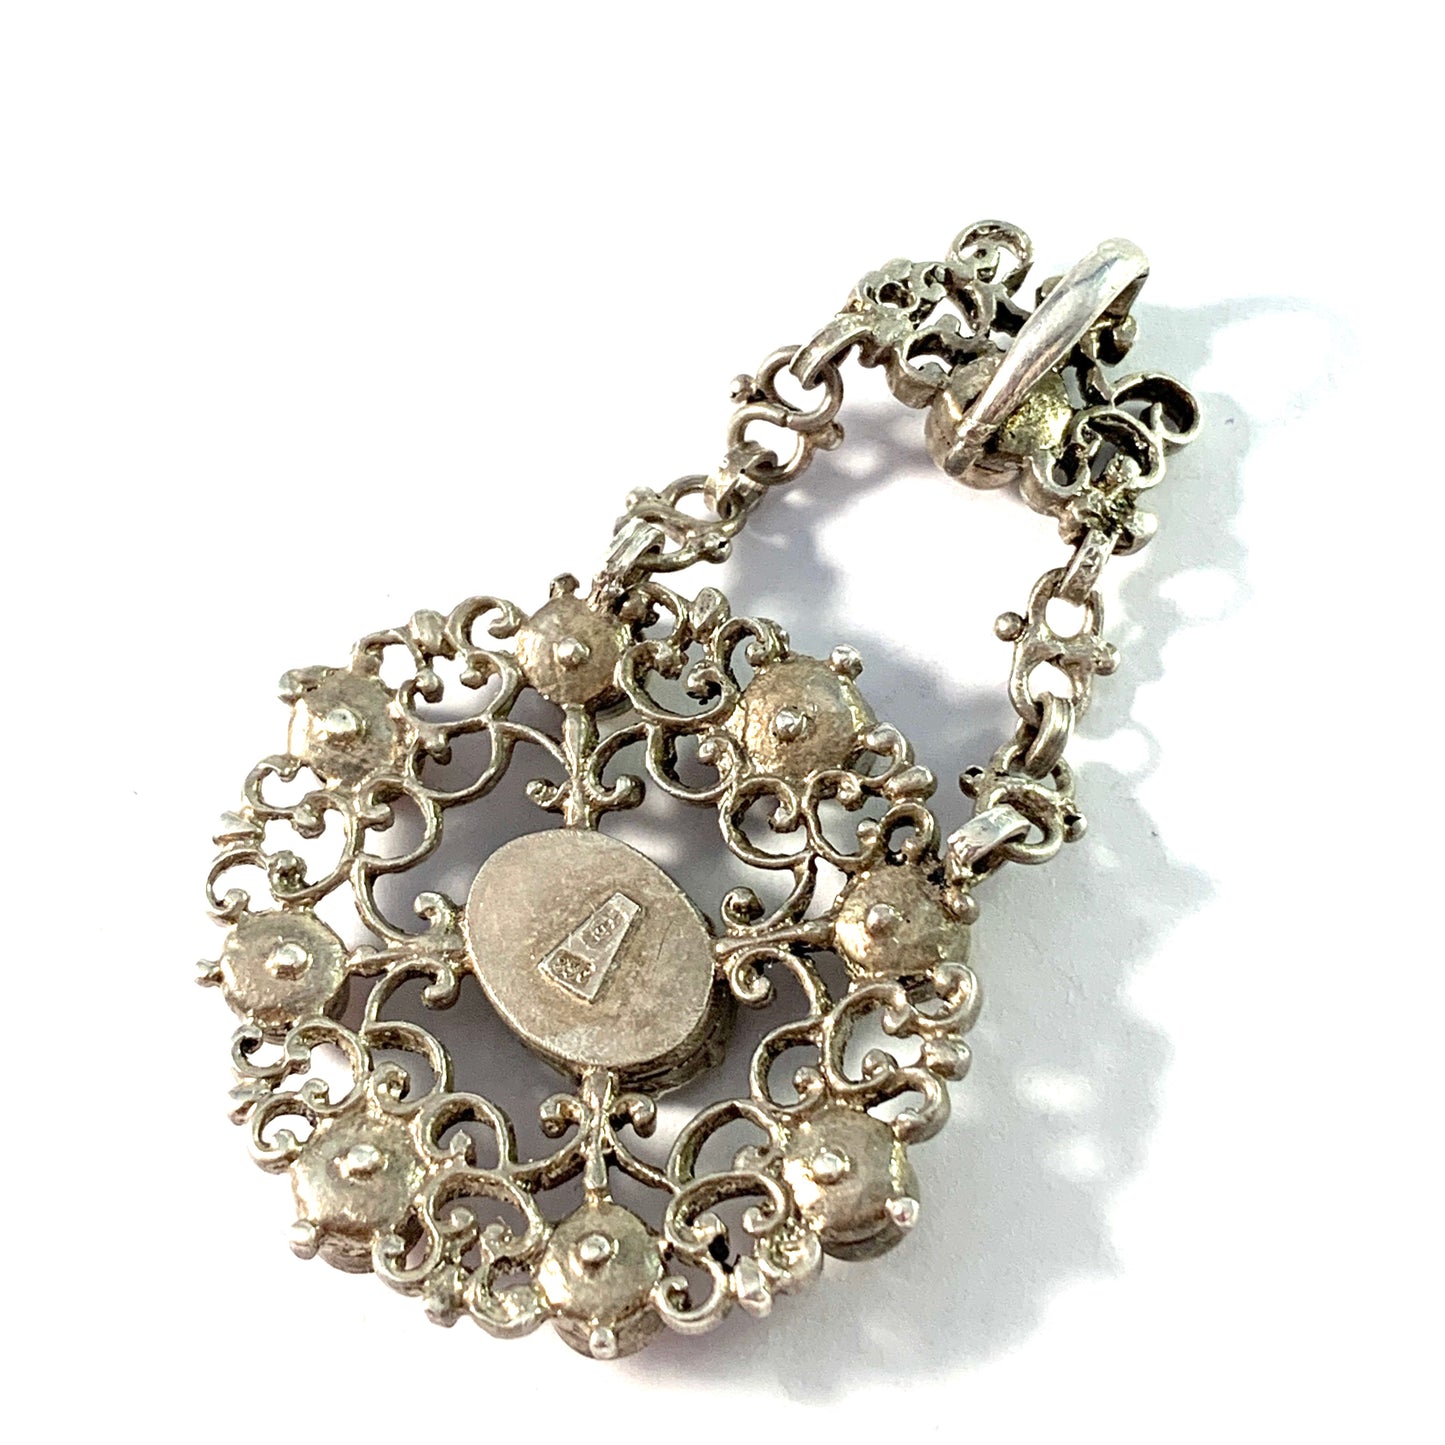 Austria / Germany early 1900s. Solid Silver M o P Foiled Back Paste Pendant.